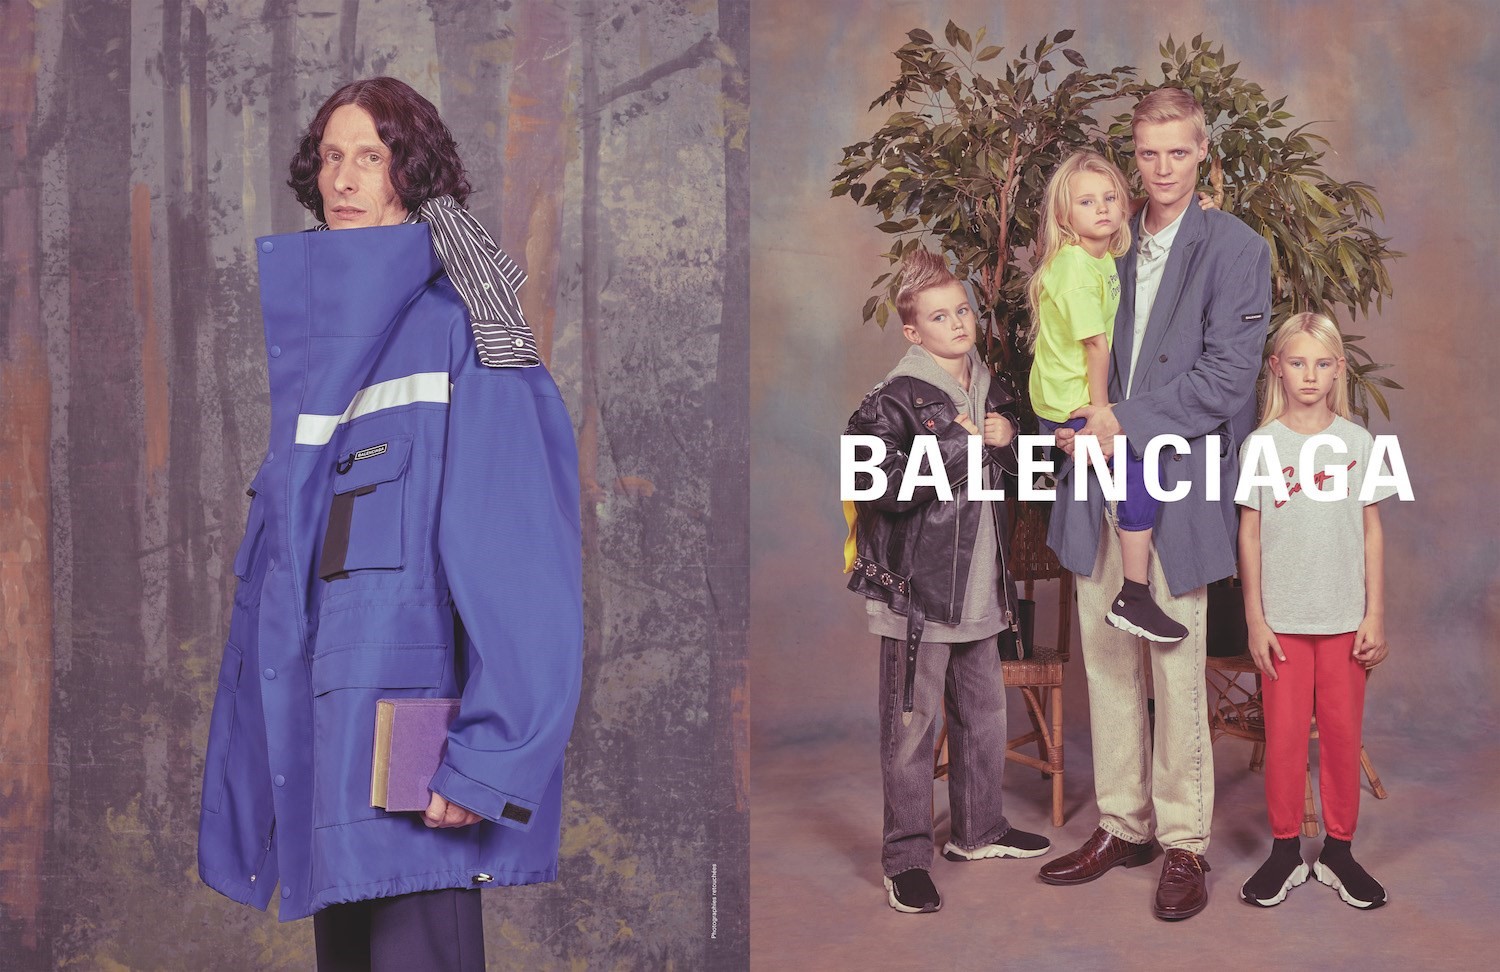 An family leads the new Balenciaga campaign |